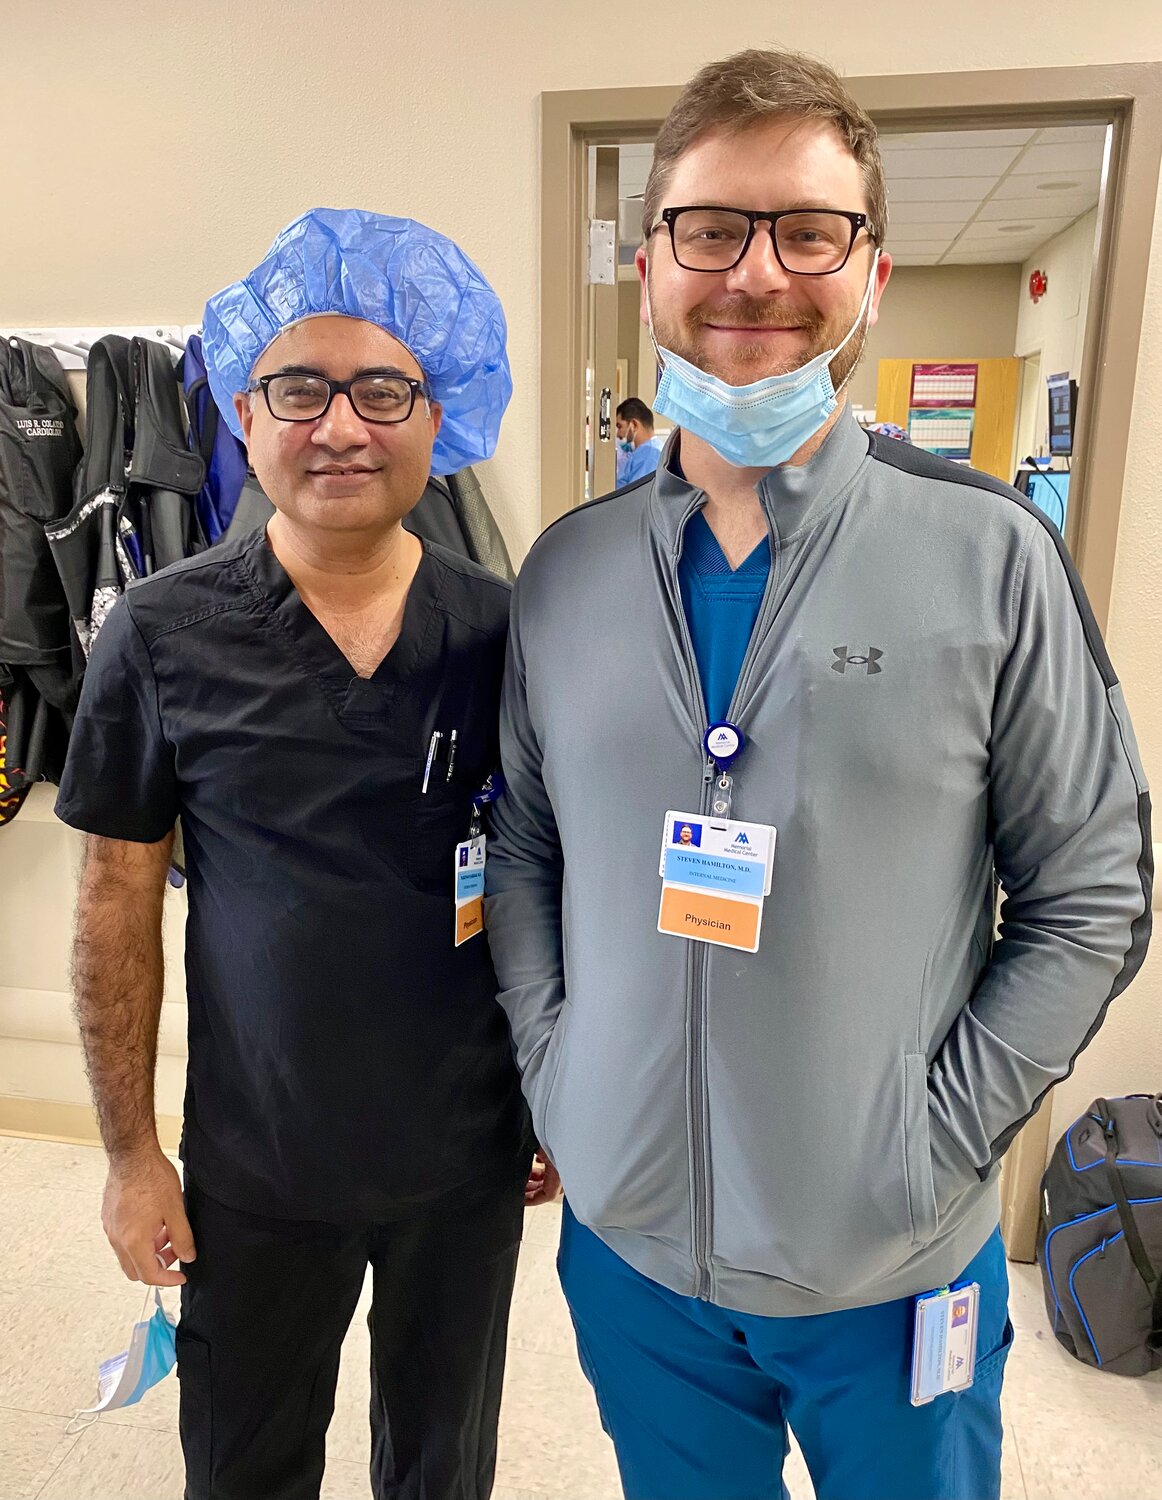 Electrophysiologist Steven Hamilton, MD, right, and Memorial Medical Center Chief of Cardiology M. Rizwan Sardar, MD, after the successful completion of a procedure in MMC’s new EP Lab.